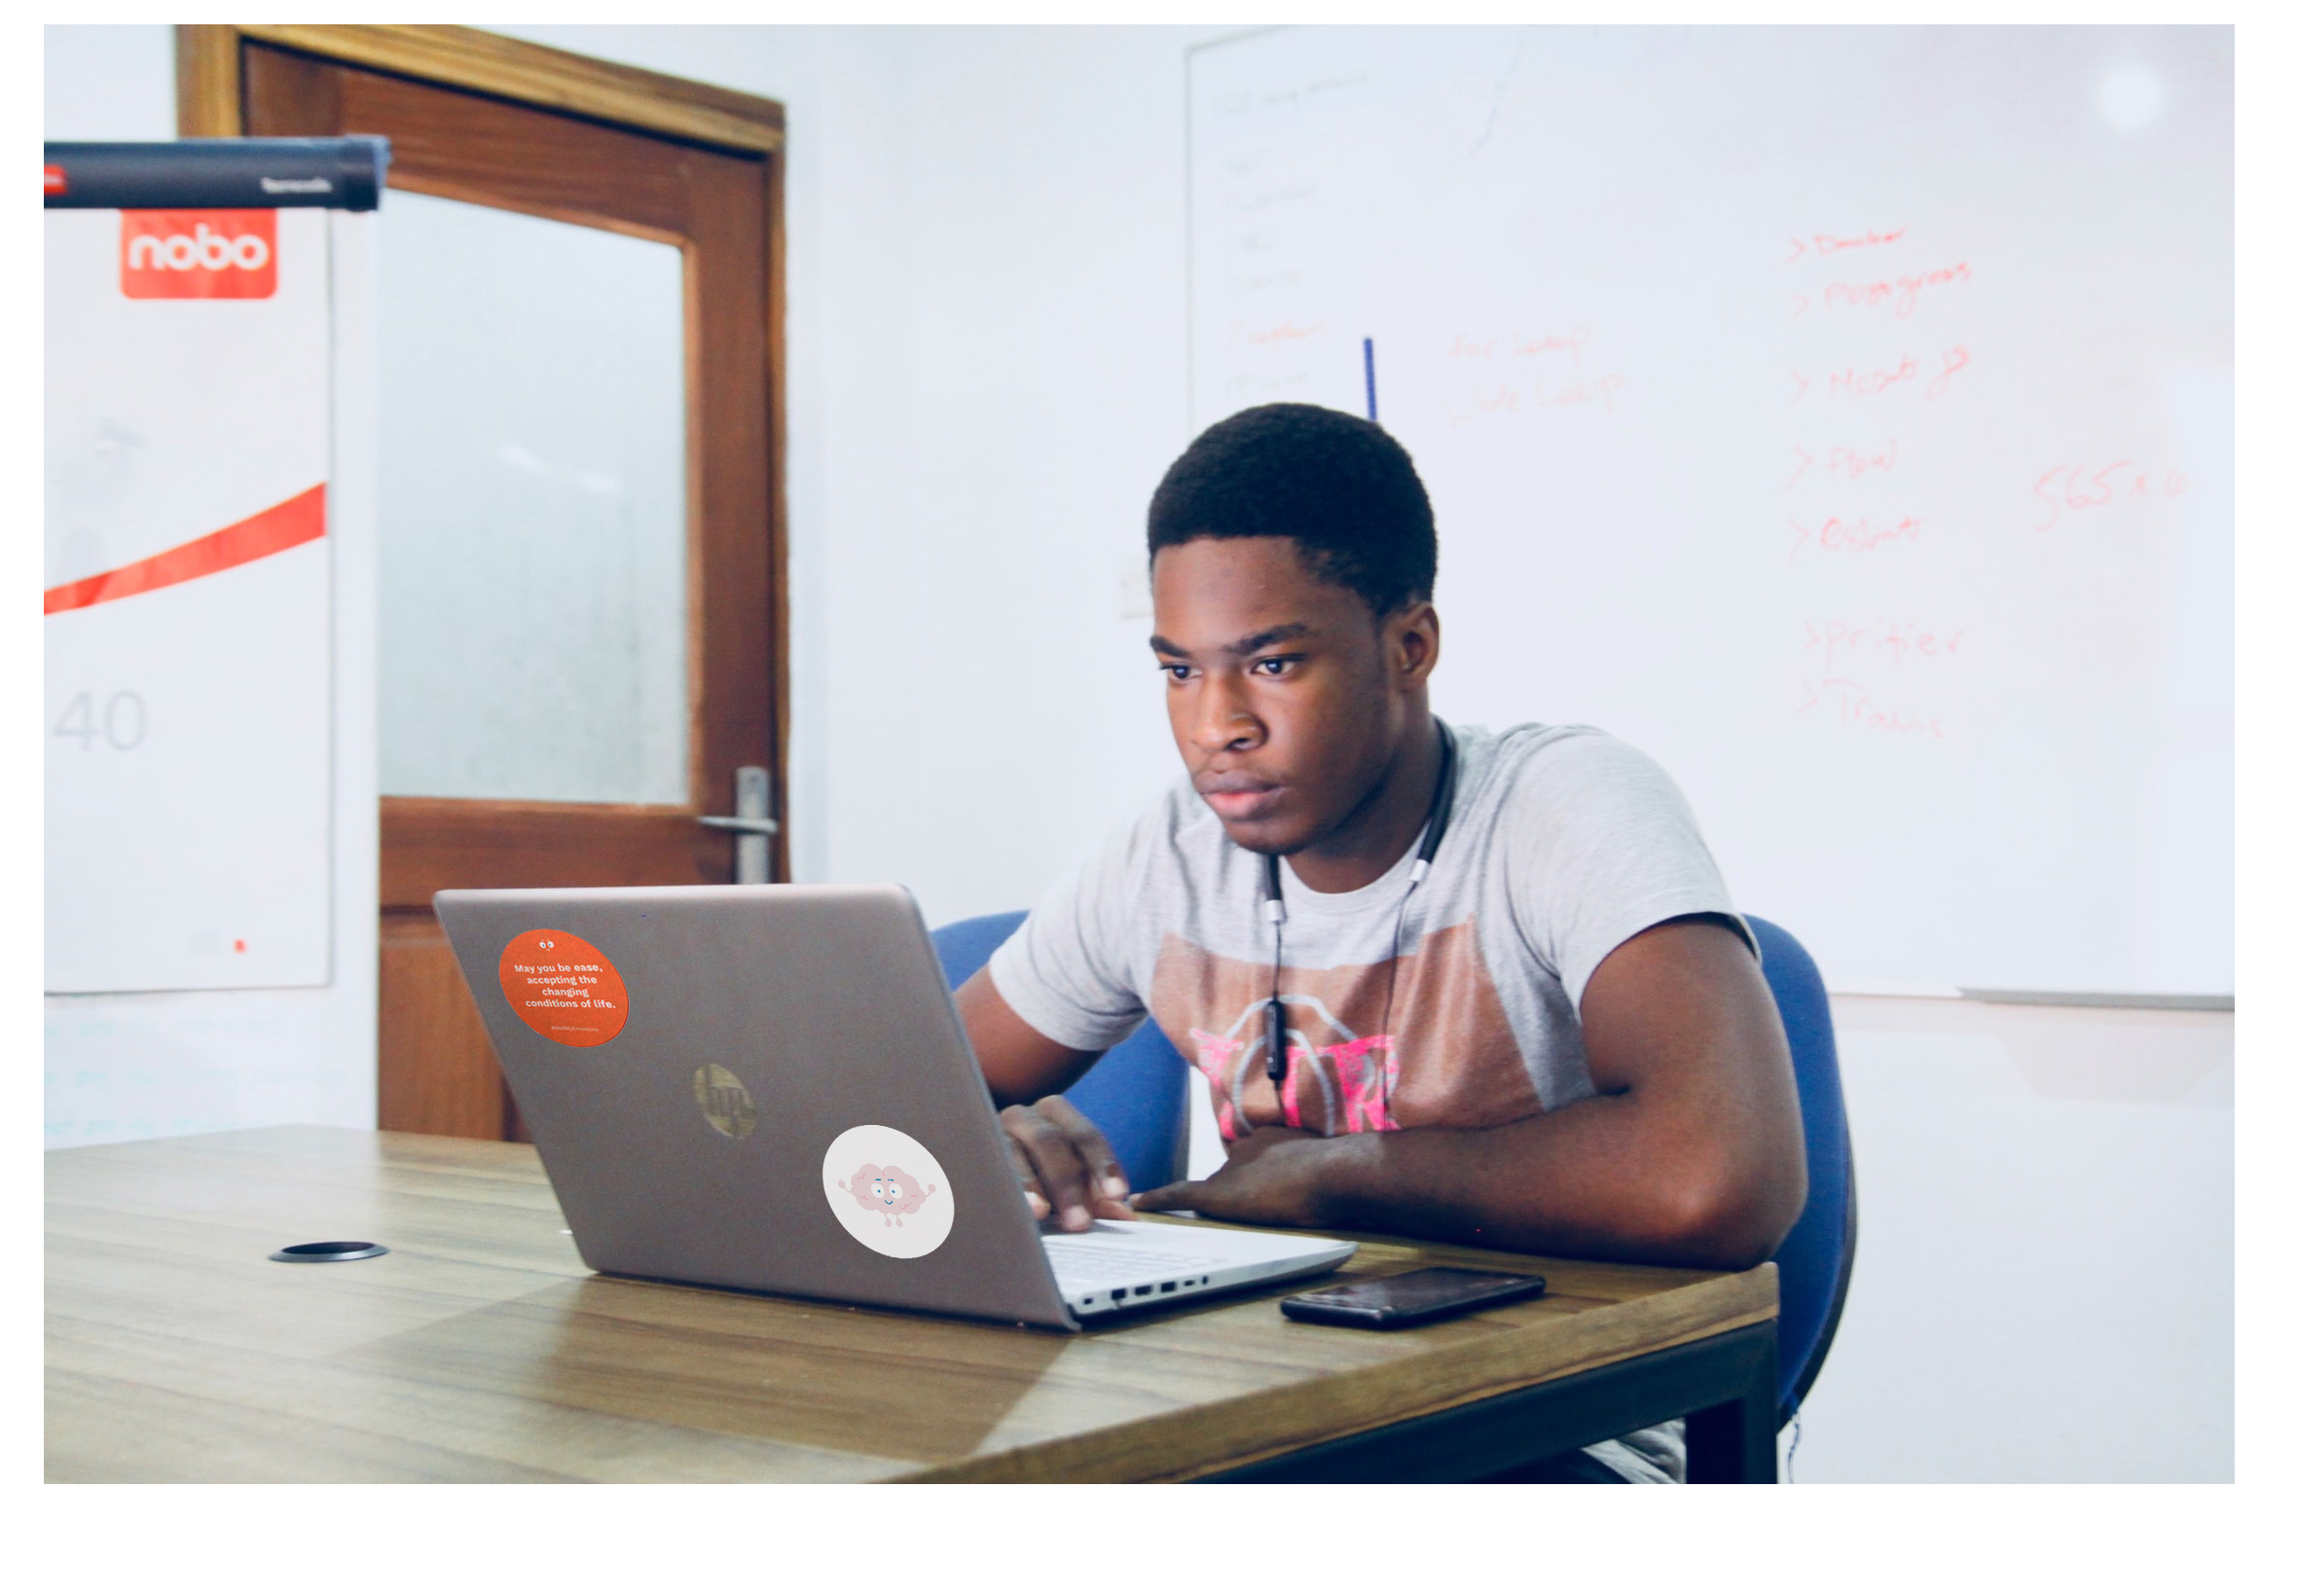 A photo of a teen sitting at a laptop showcasing stickers made for the Me and My Emotions campaign designed by ArtCenter students for a Designmatters class and implemented by a nonprofit partner to help teens with mental wellbeing.